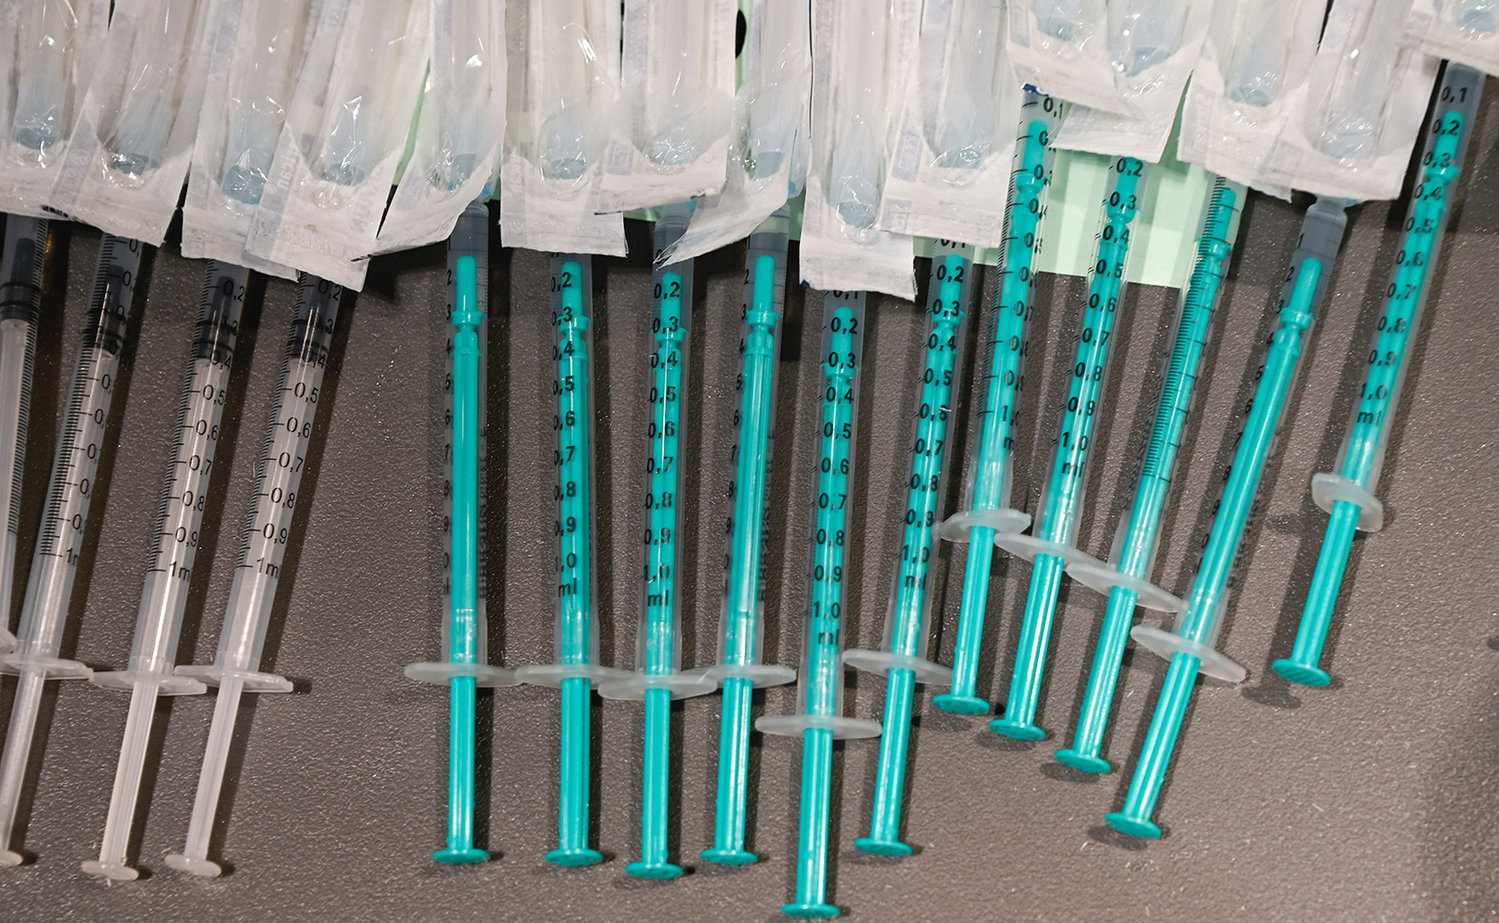 Syringes filled with the Pfizer Biontech Covid-19 vaccine lie on a tray in a mobile Covid-19 vaccination centre set up in a shopping mall in Ludwigsburg, southern Germany, on Nov. 11, 2021, amid a surge of infections during the ongoing coronavirus pandemic. (Thomas Kienzle/AFP via Getty Images/TNS)